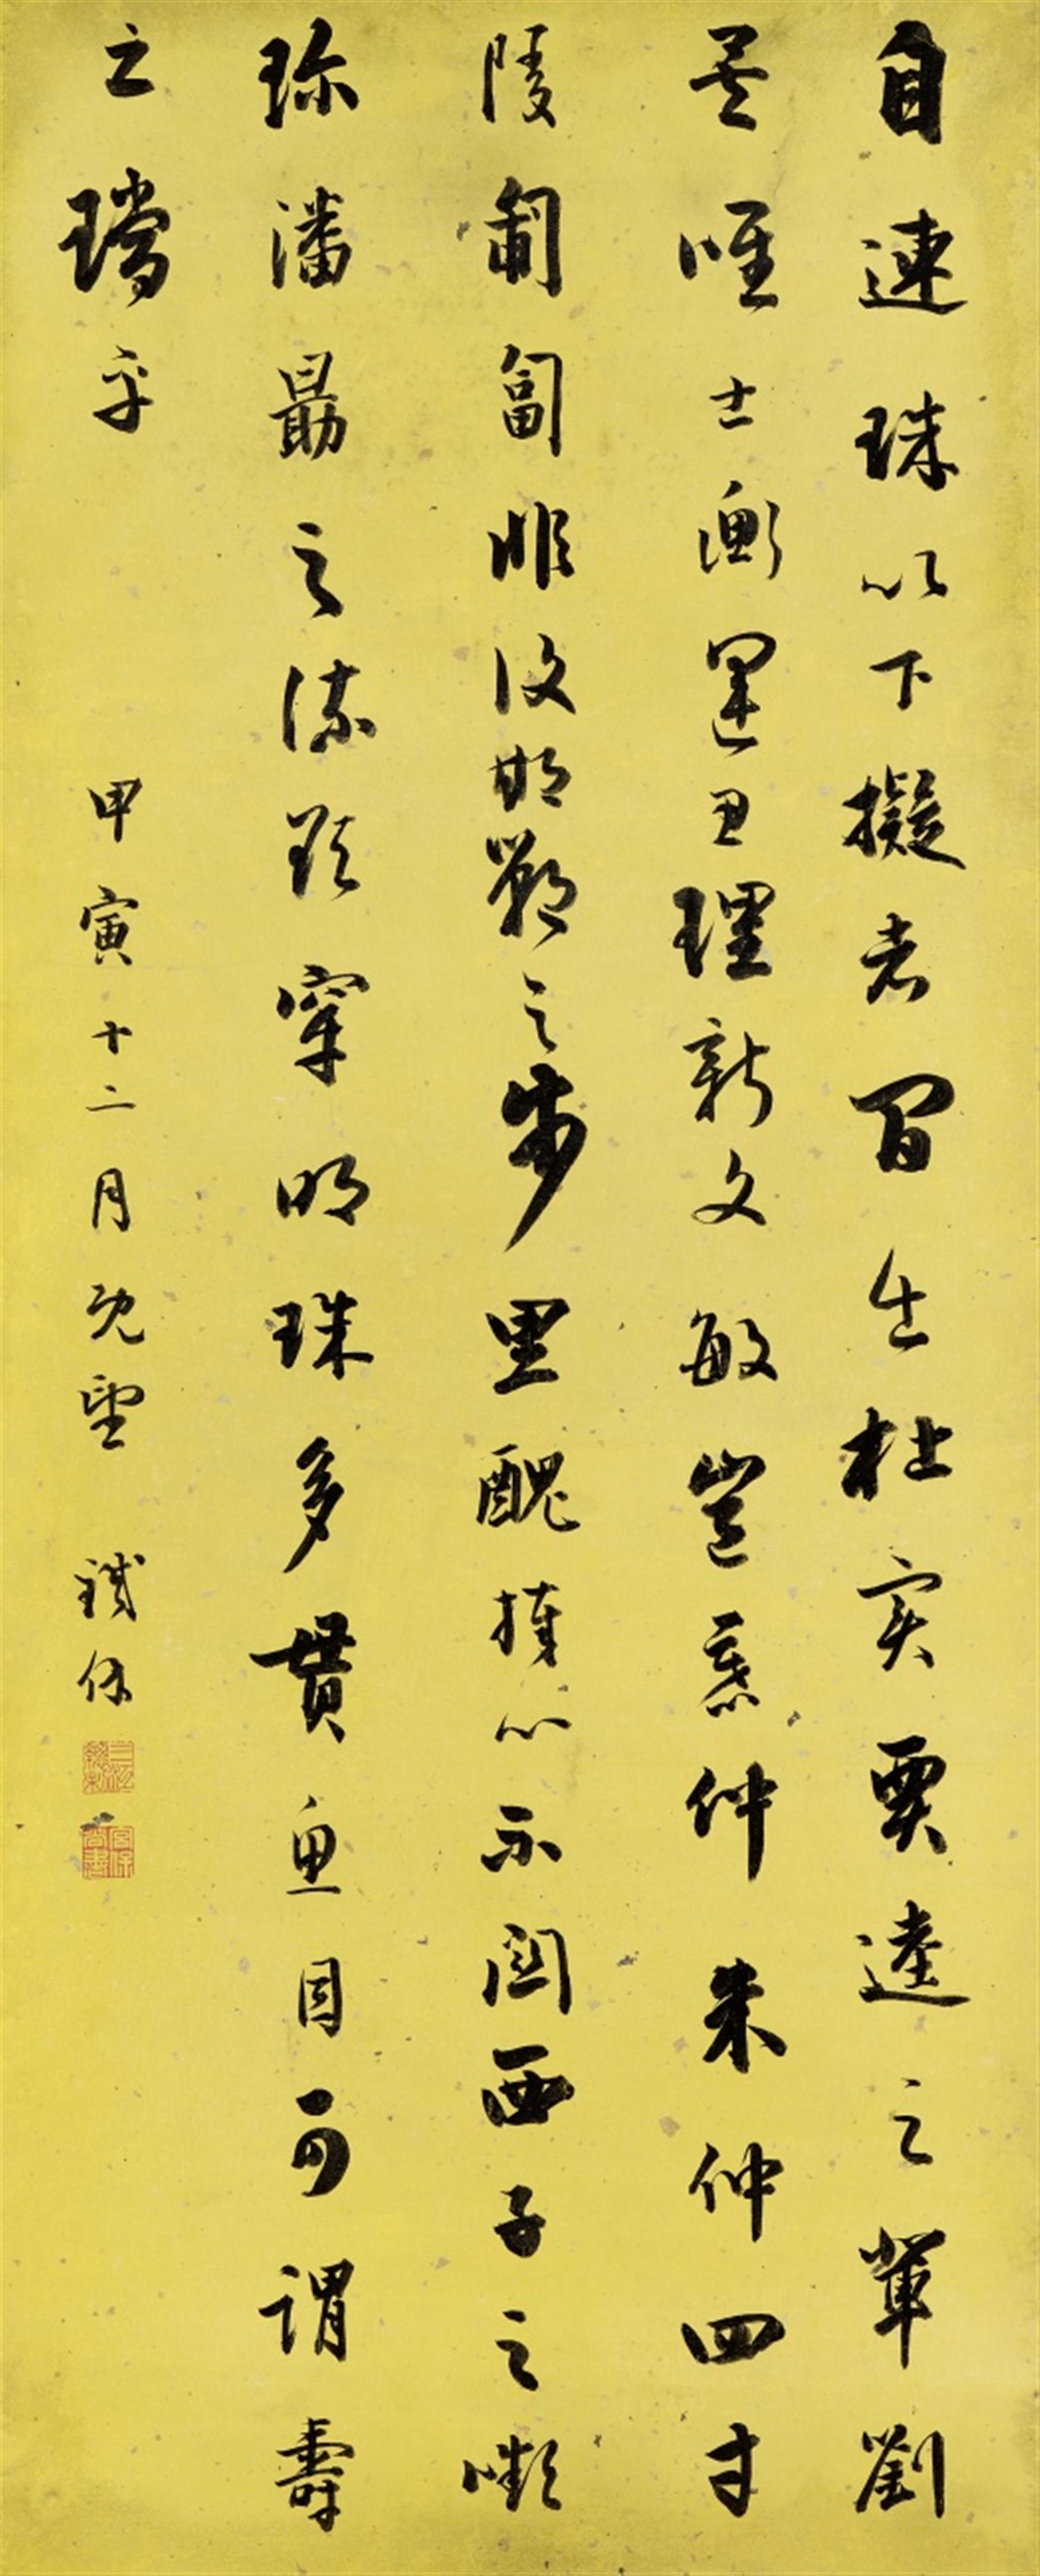 After Tie Bao . 20th century - Calligraphy. Hanging scroll. Ink on yellow, gold-flecked paper. Inscription, dated cyclically jiayin (1794), signed Tie Bao and sealed San jiang zong zhi and Gong Bao shang hua. - image-1